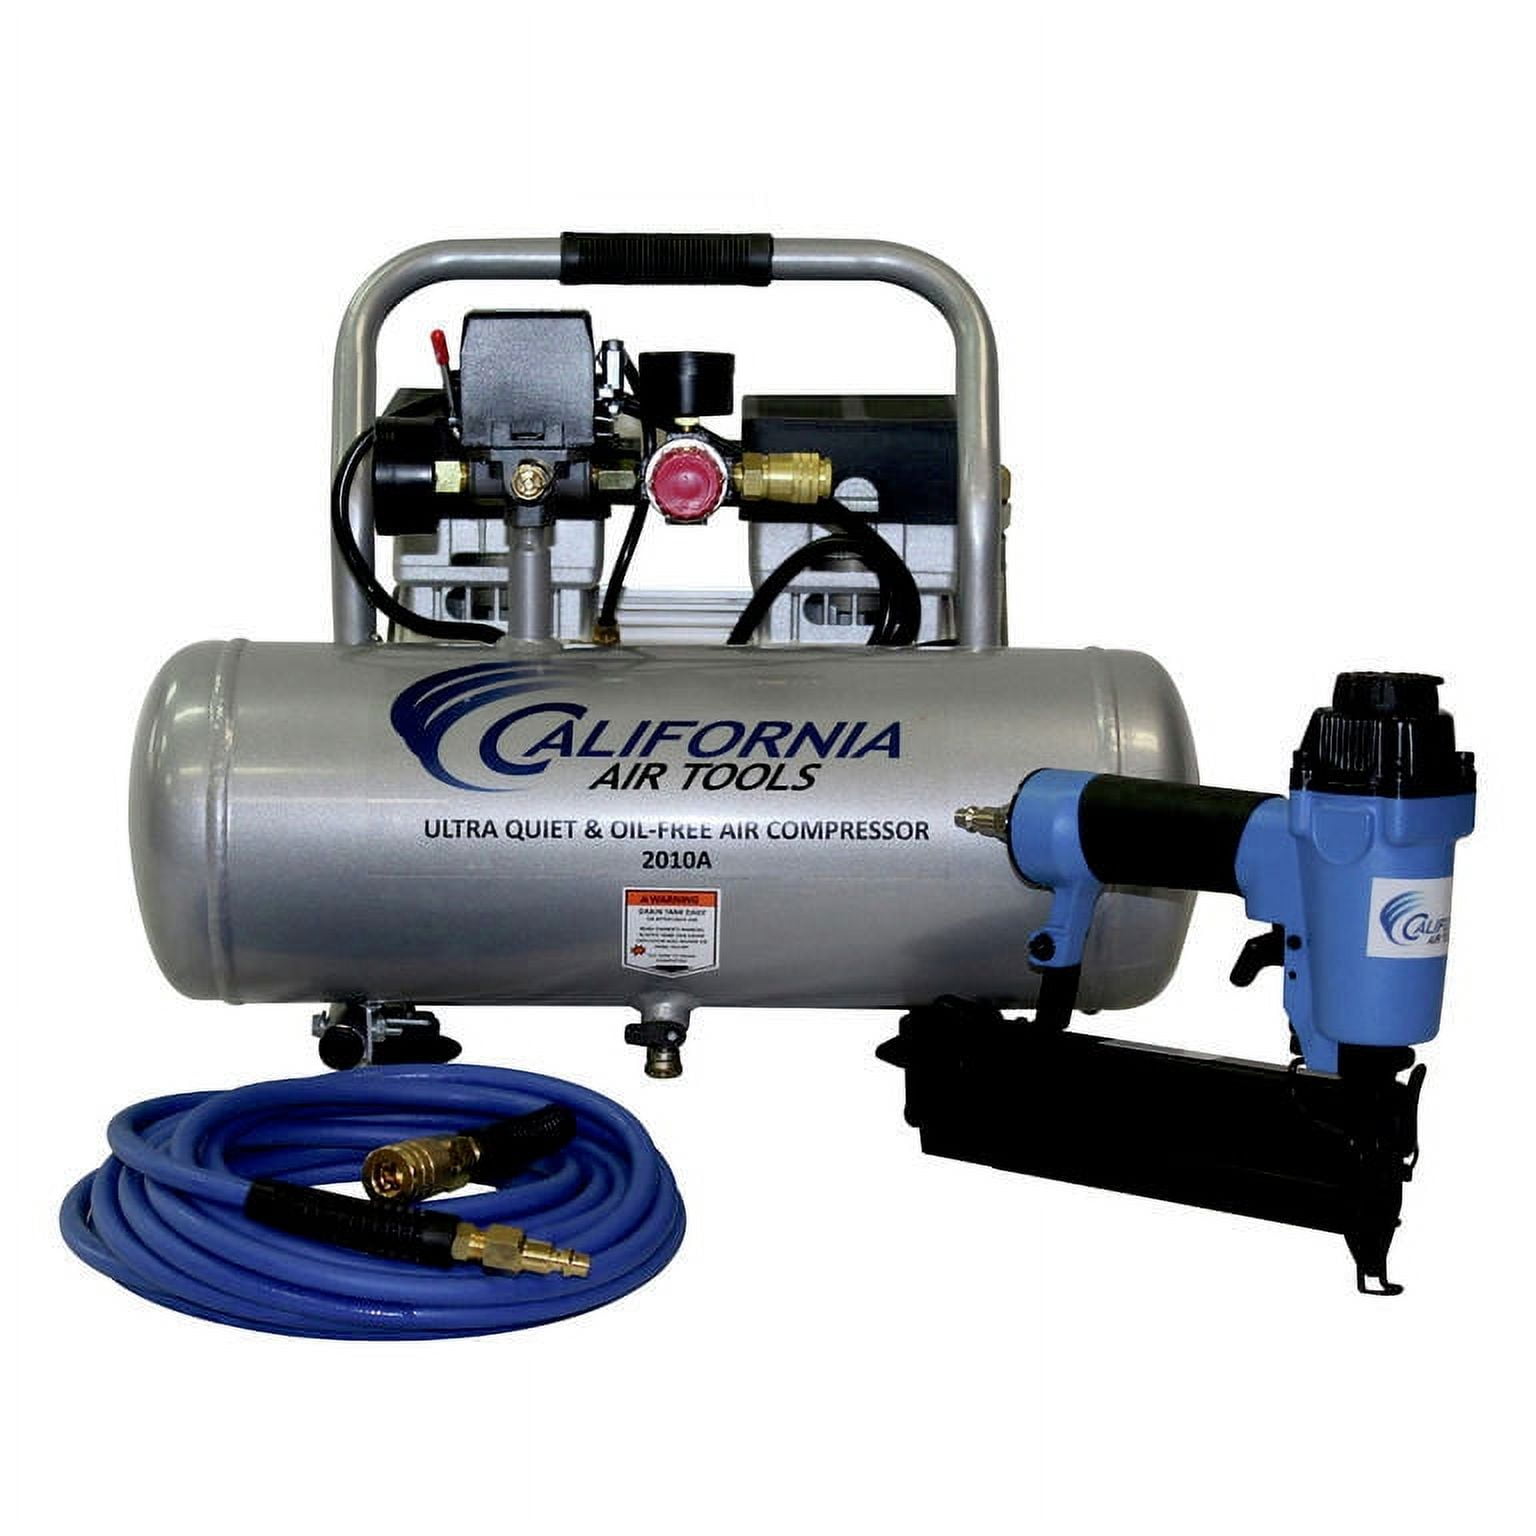  PointZero 1/5 HP Airbrush Compressor with Air Tank